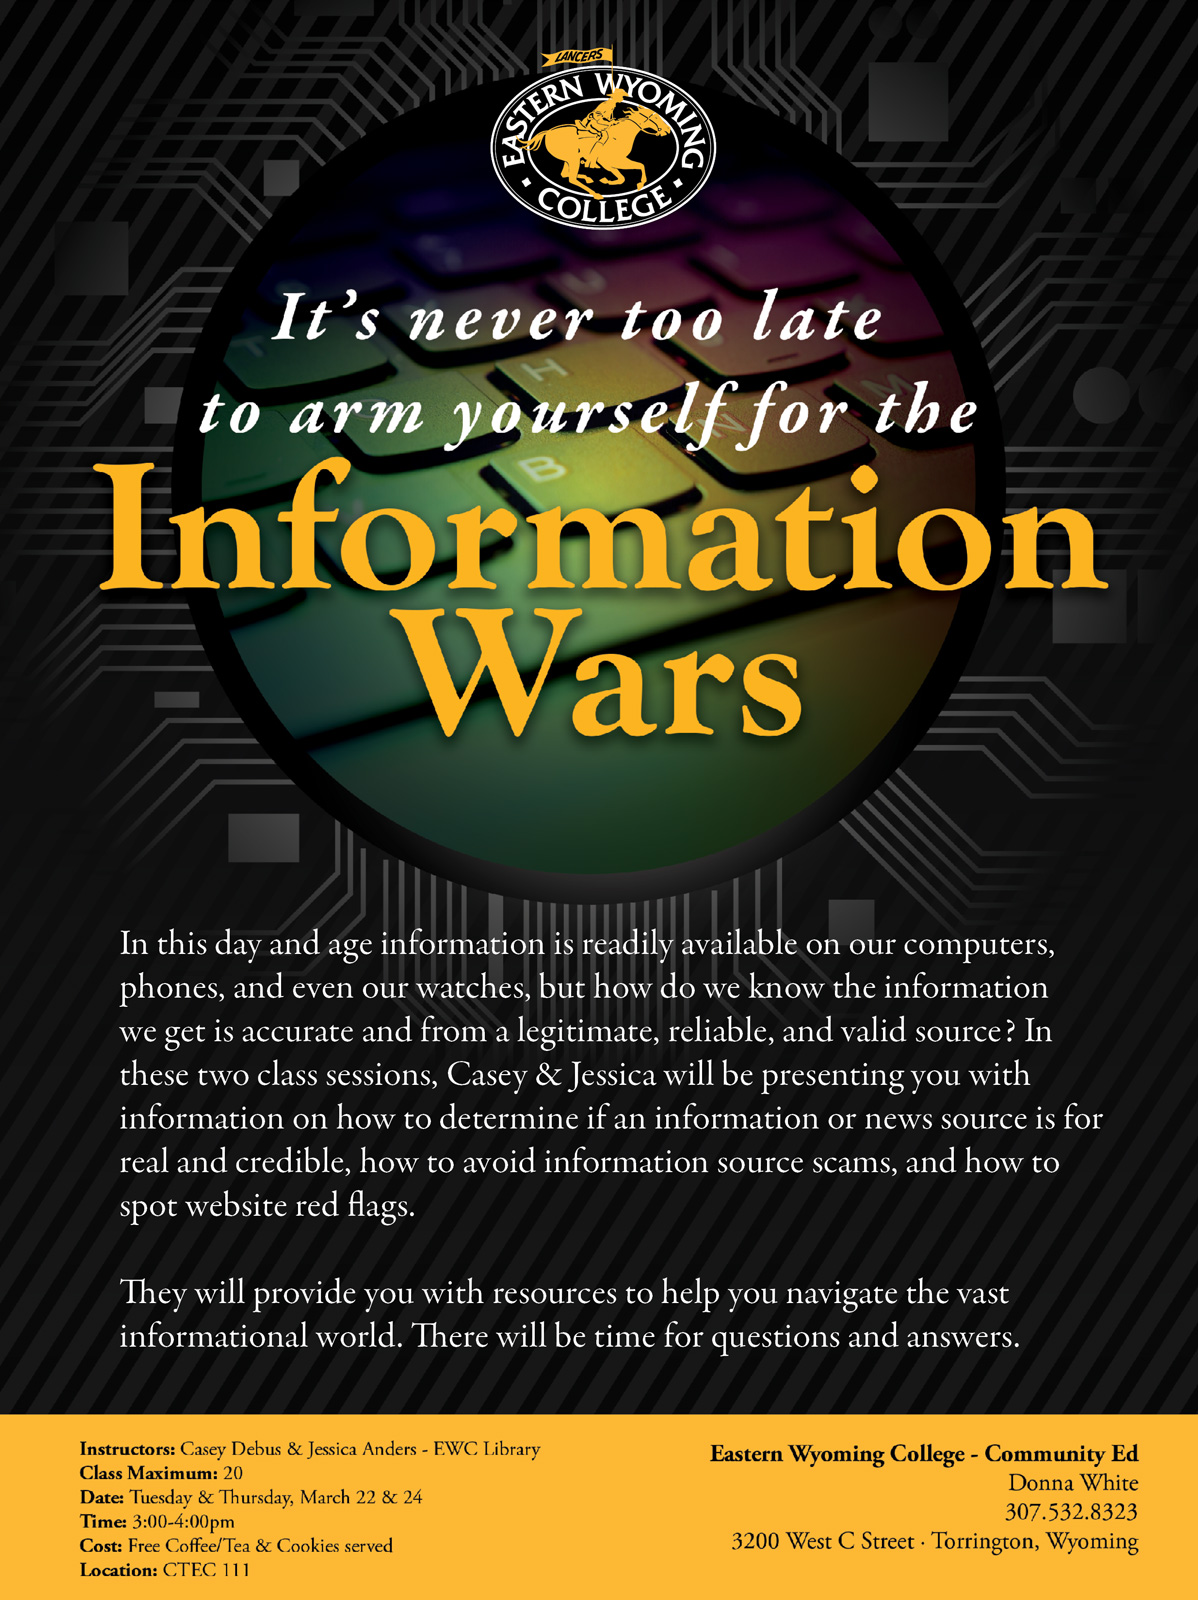 It’s never too late to arm yourself for the Information wars